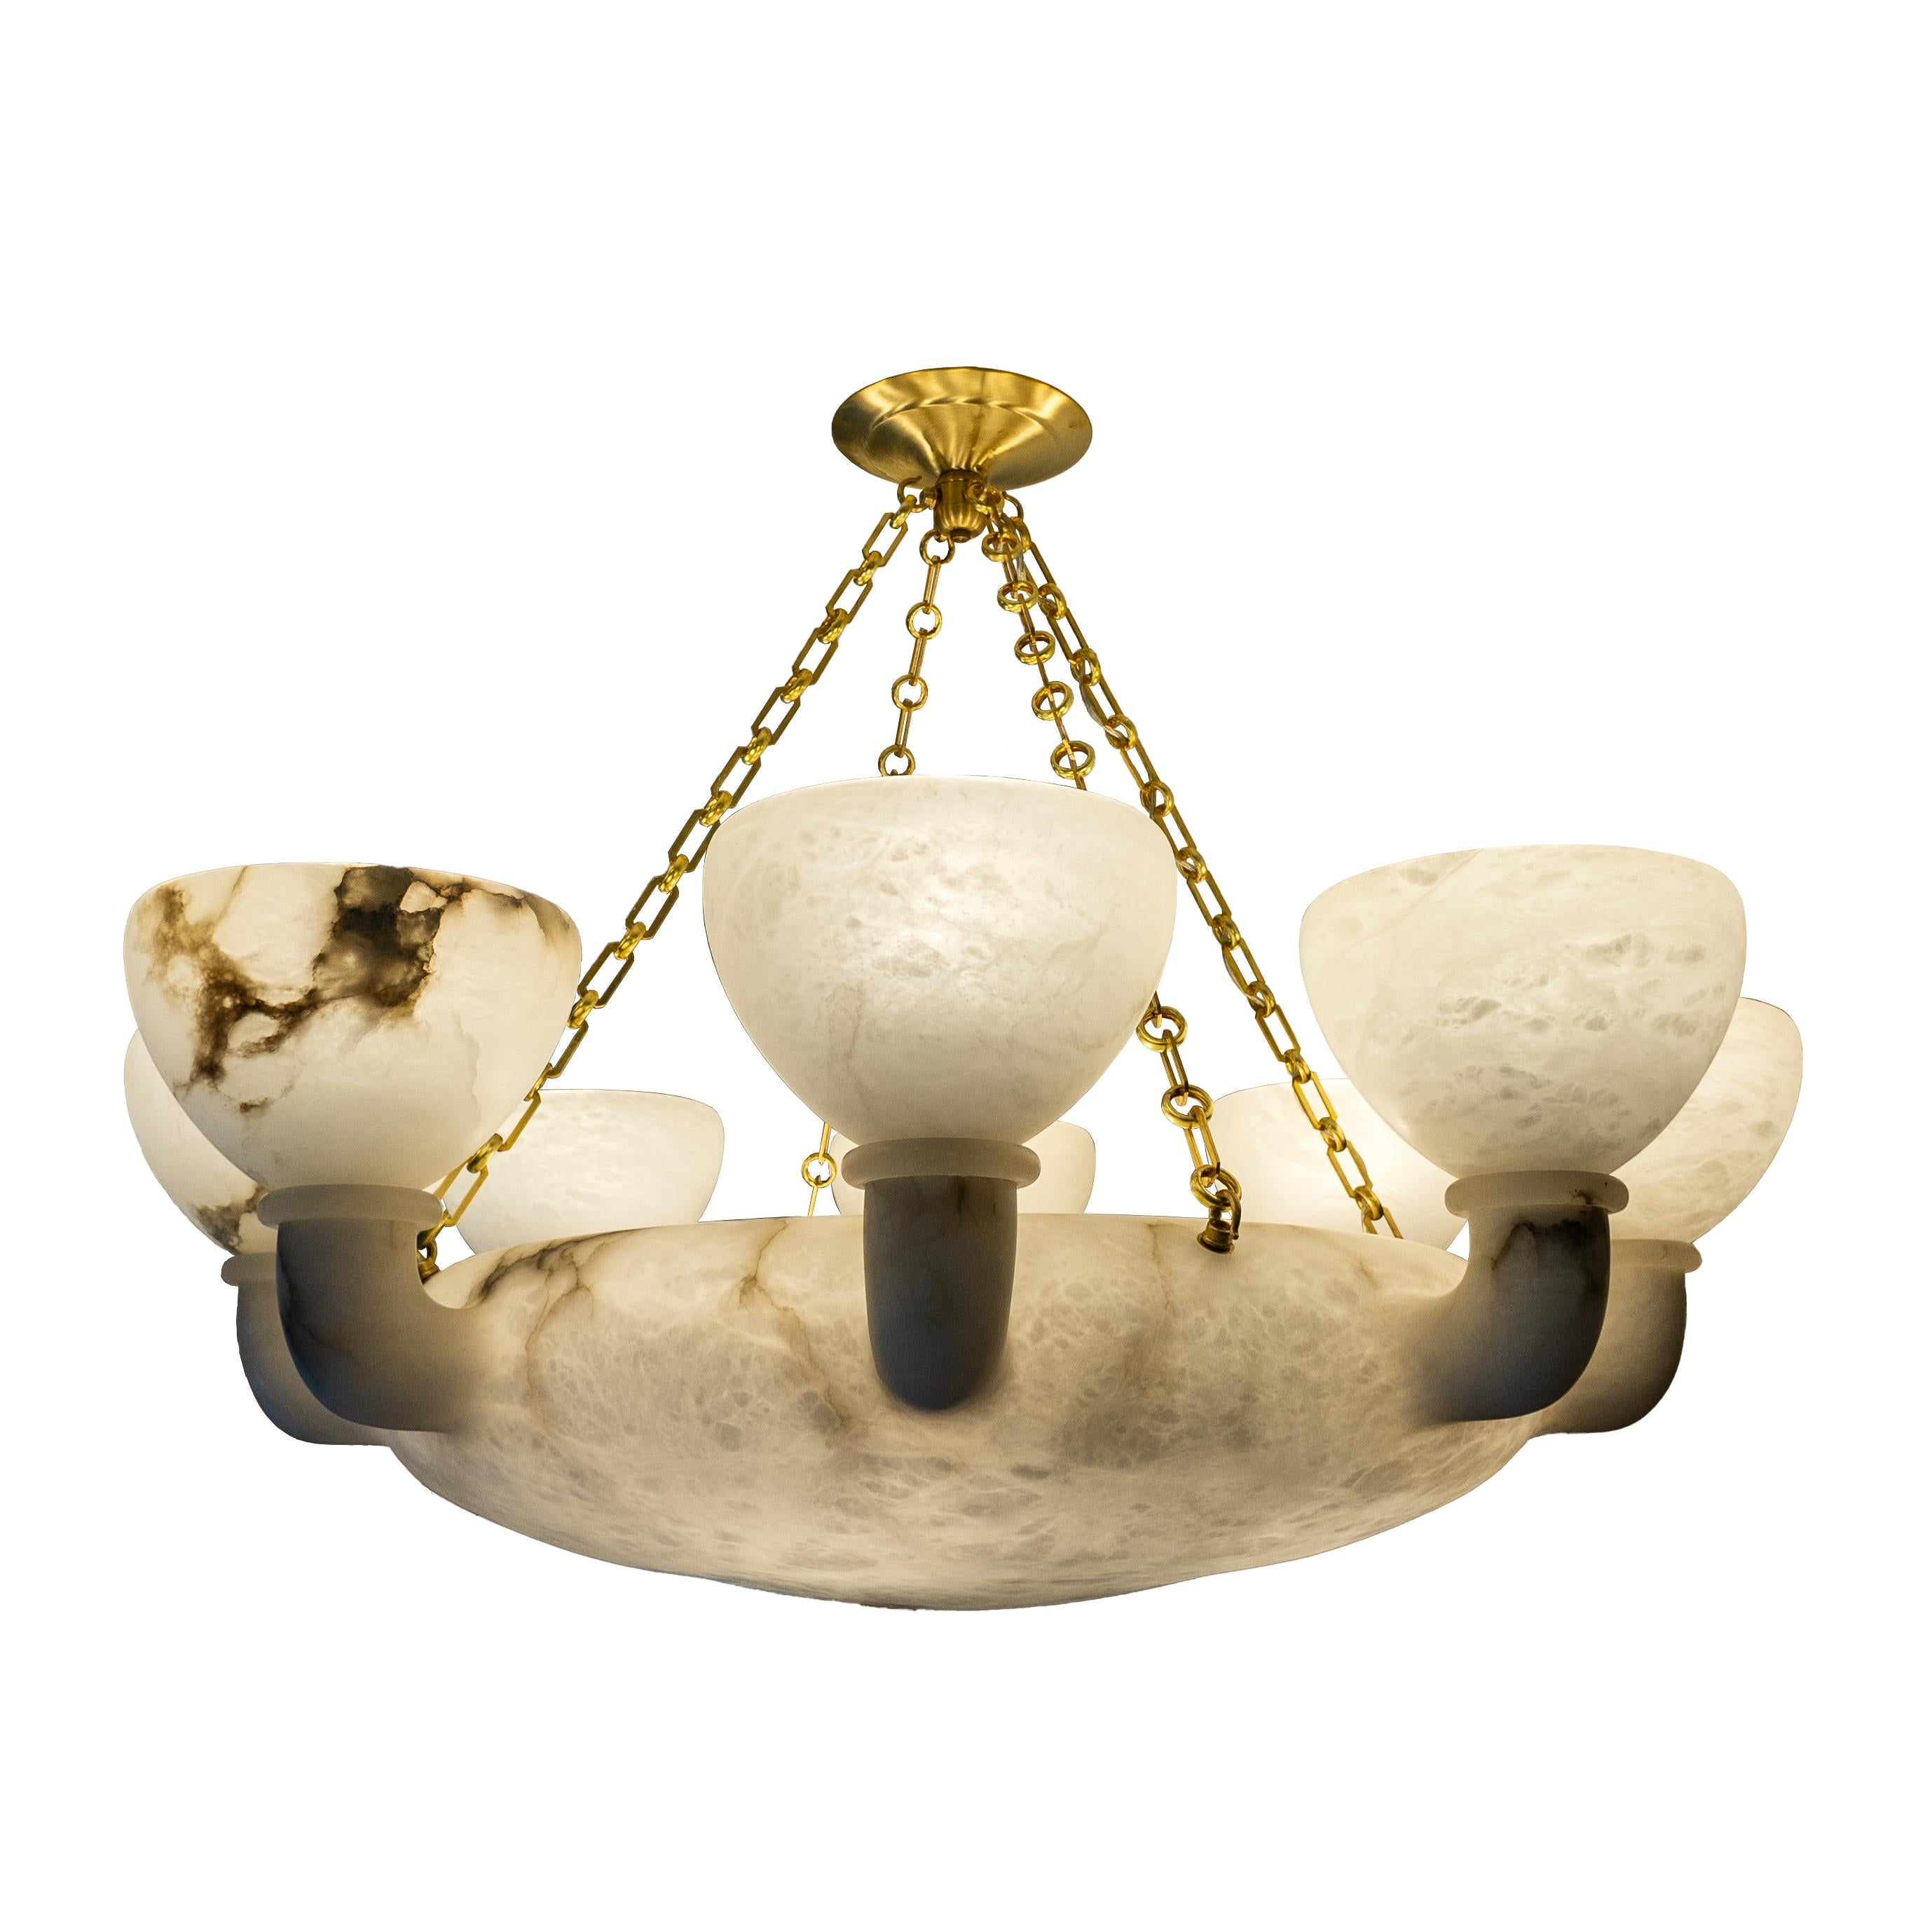 Experience unparalleled sophistication with this extraordinary candelabra-style fixture, a testament to meticulous craftsmanship and rare design finesse. Crafted from a single block of stone, its balanced and proportionate silhouette is a rarity in